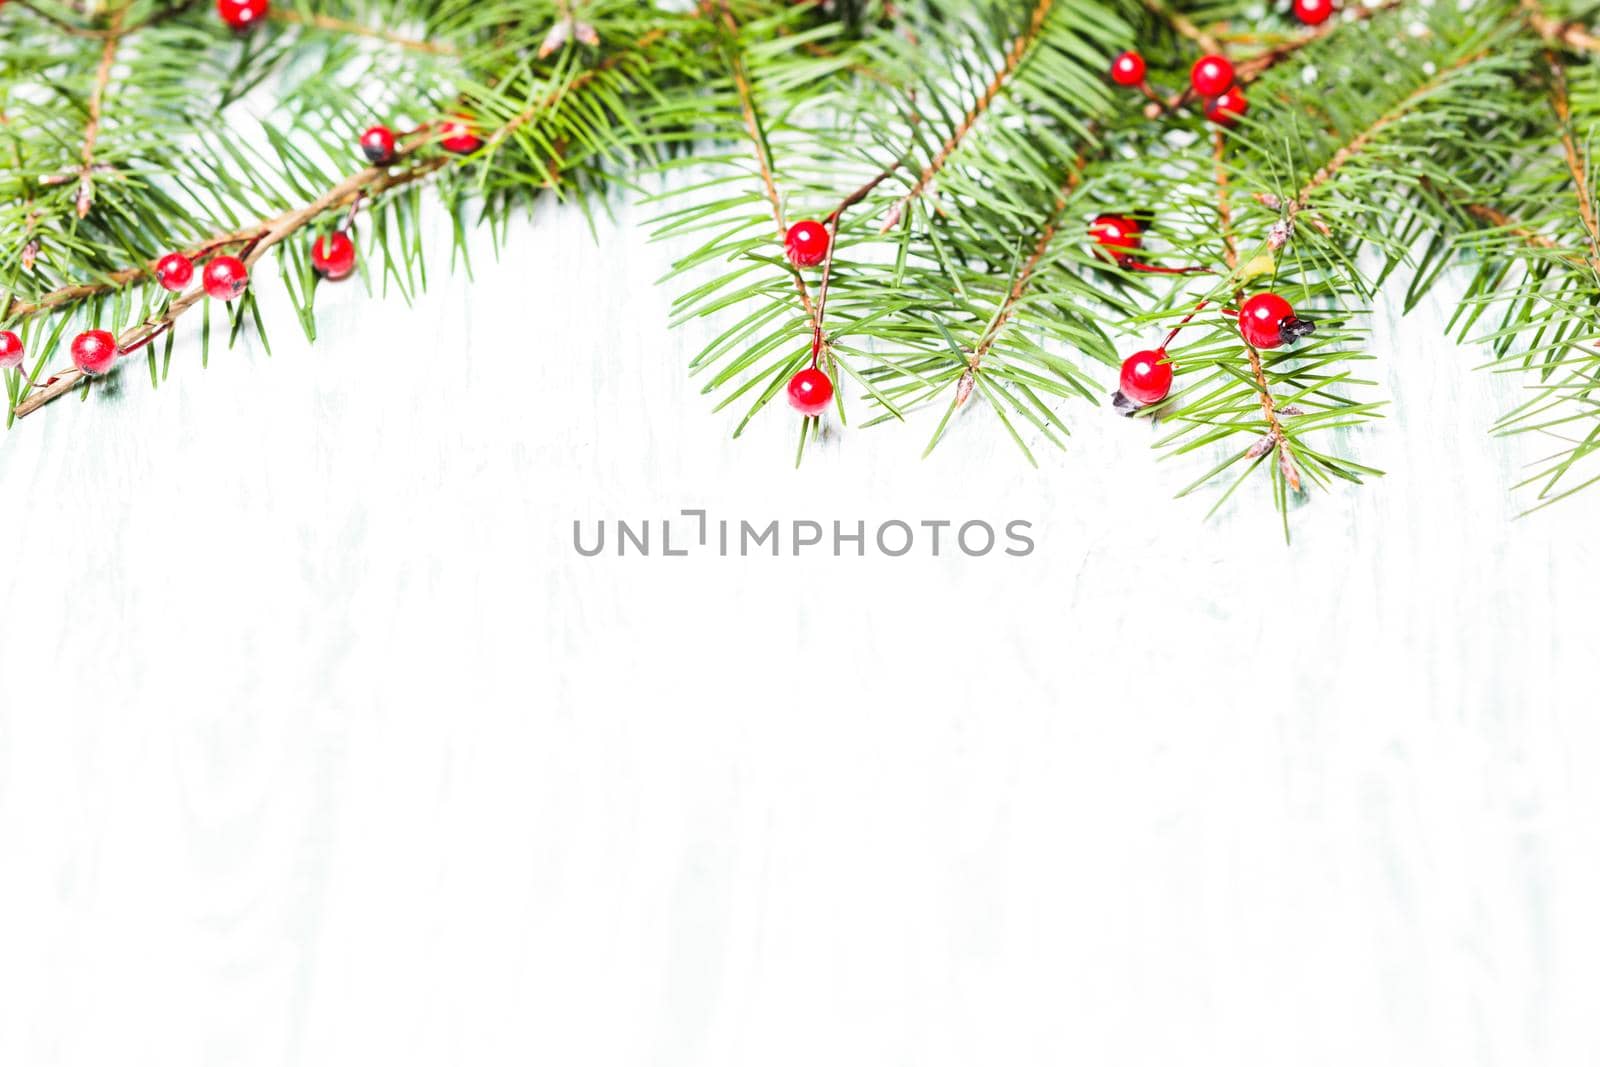 Fir brahcnes with holly berries by oksix